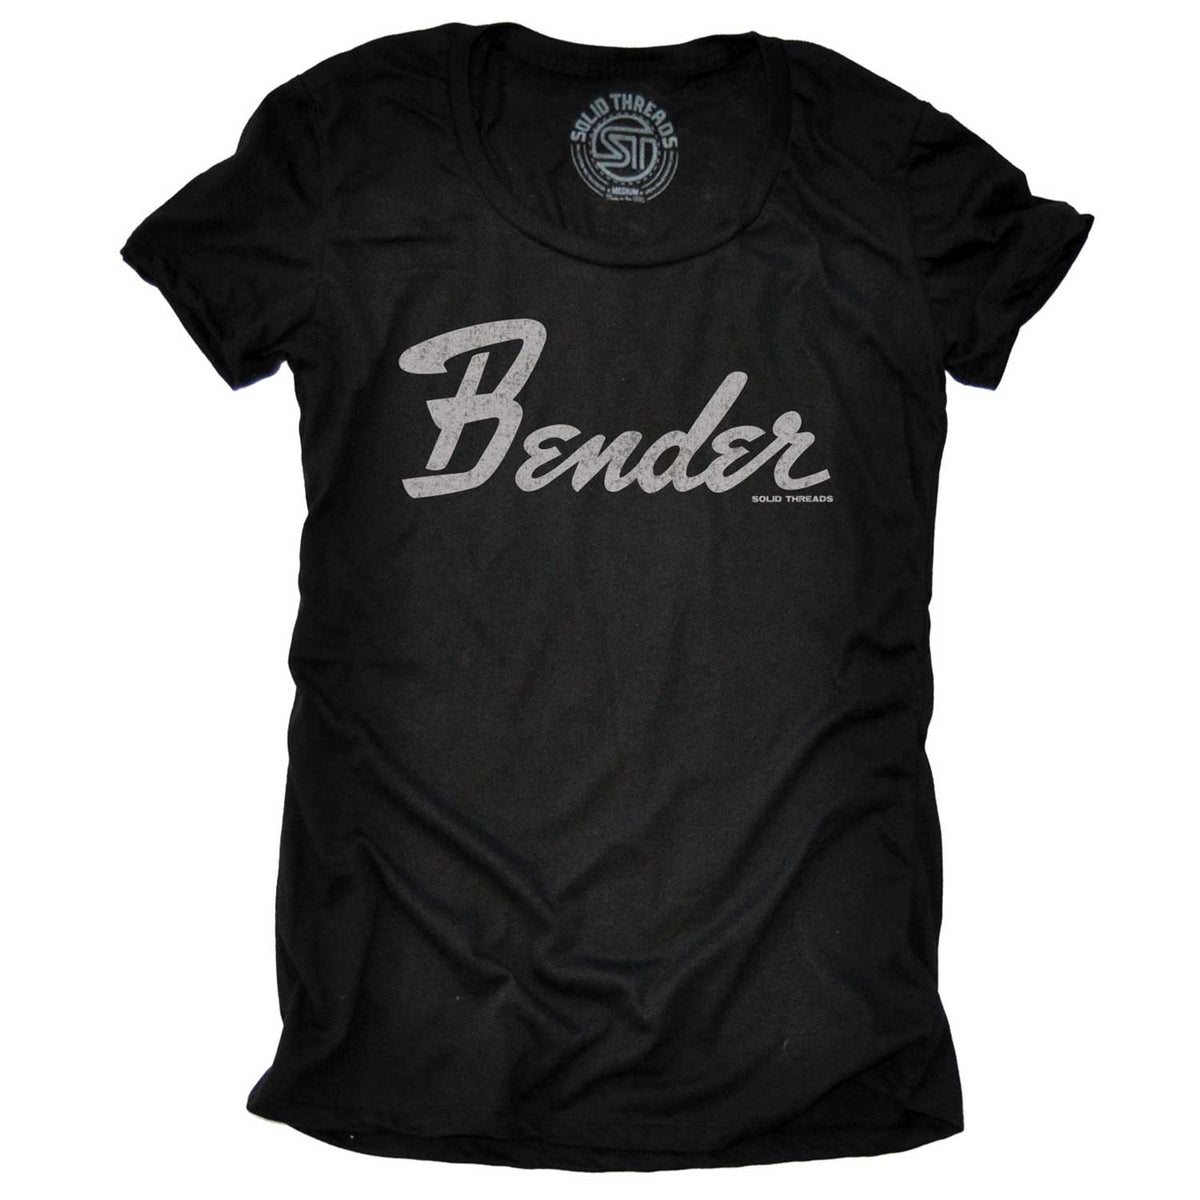 Women&#39;s Bender Vintage Partying Graphic T-Shirt | Funny Music Festival Tee | Solid Threads